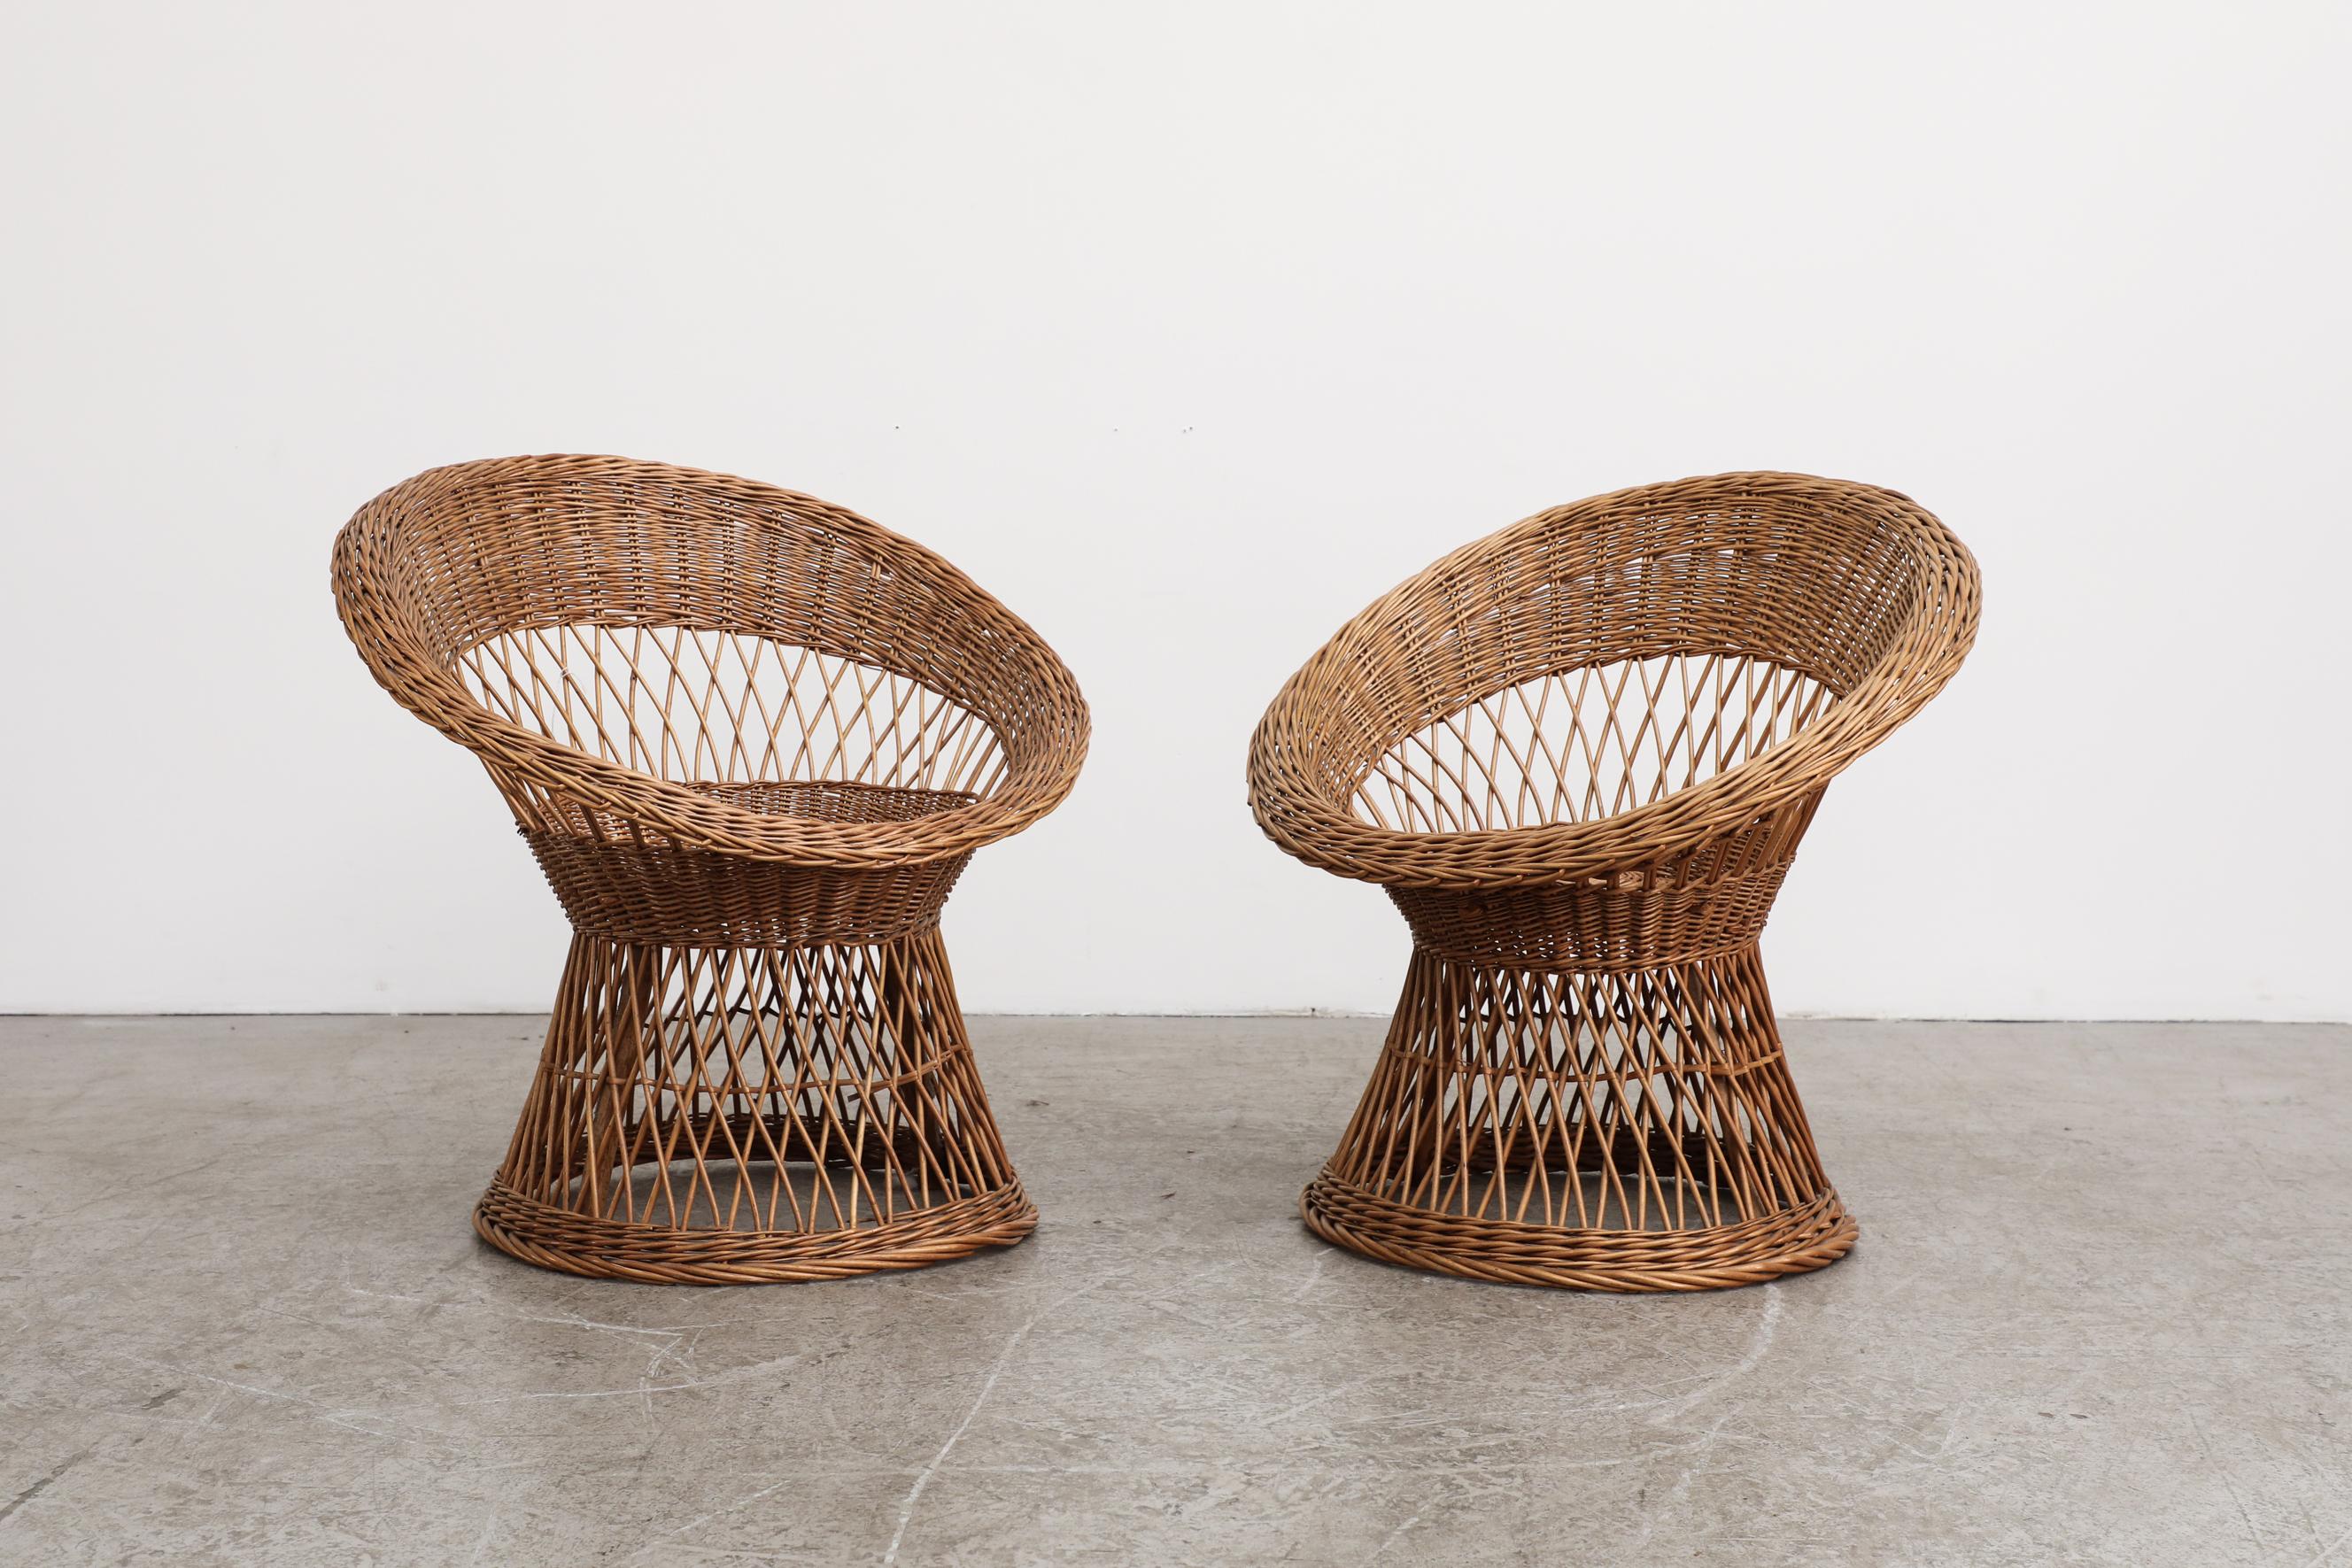 Pair of round, mid-century, mini peacock chairs hand made from woven rattan. In original condition with visible wear, including some minor breakage to rattan. Wear is consistent with their age and use. One is slightly smaller than the other. Sold as